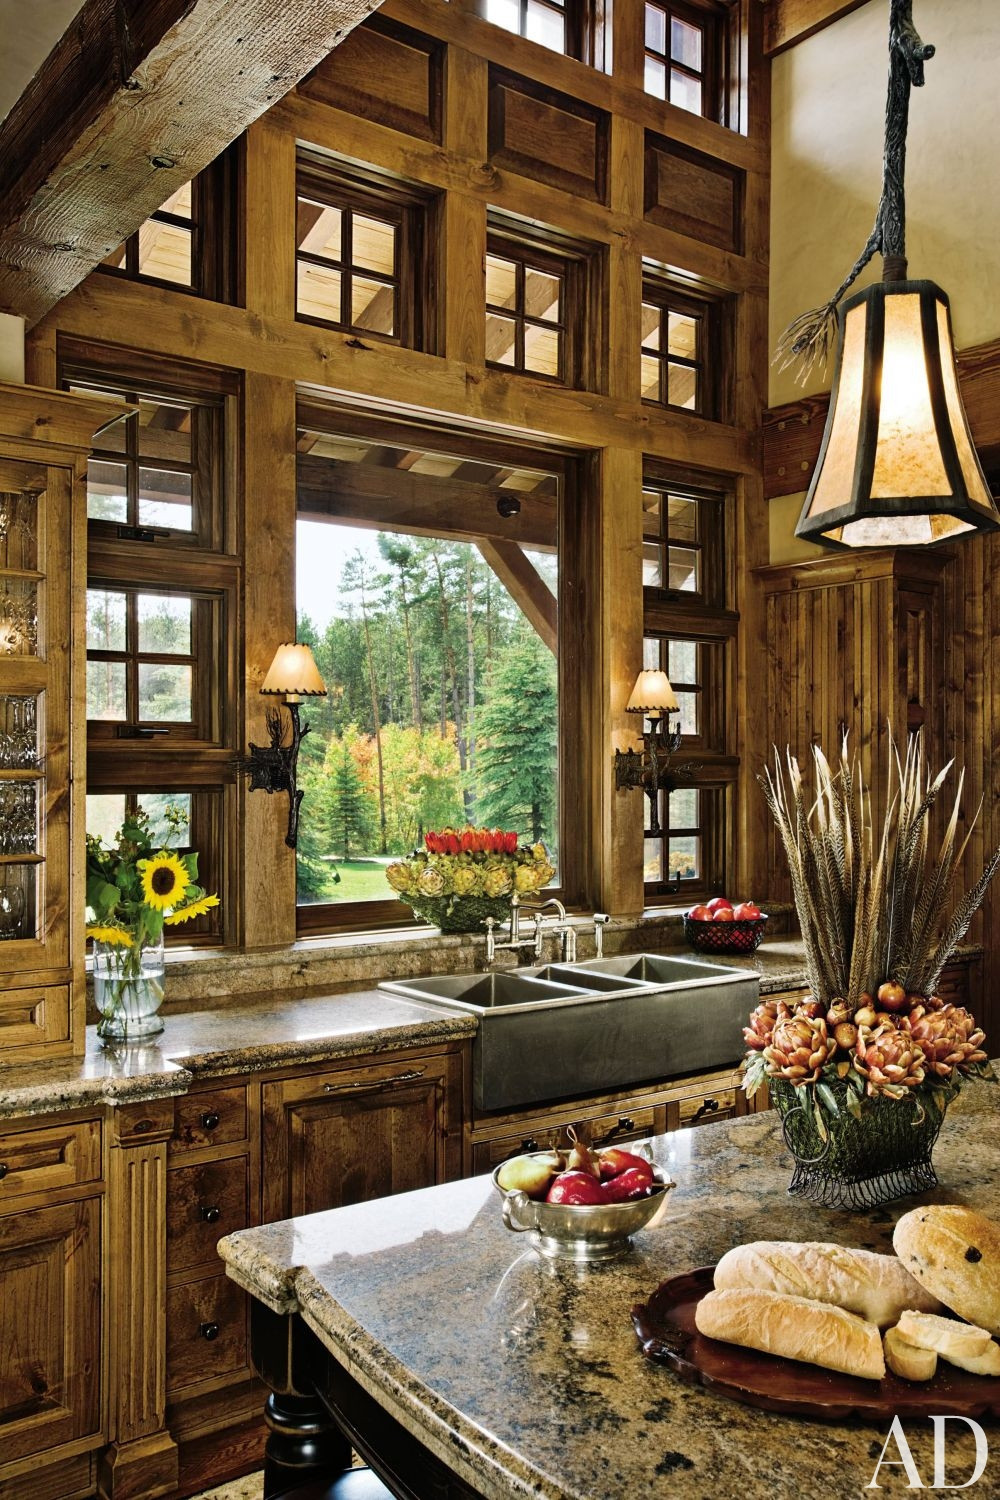 Rustic Style Kitchen
 How to Introduce Rustic Style to Your Home